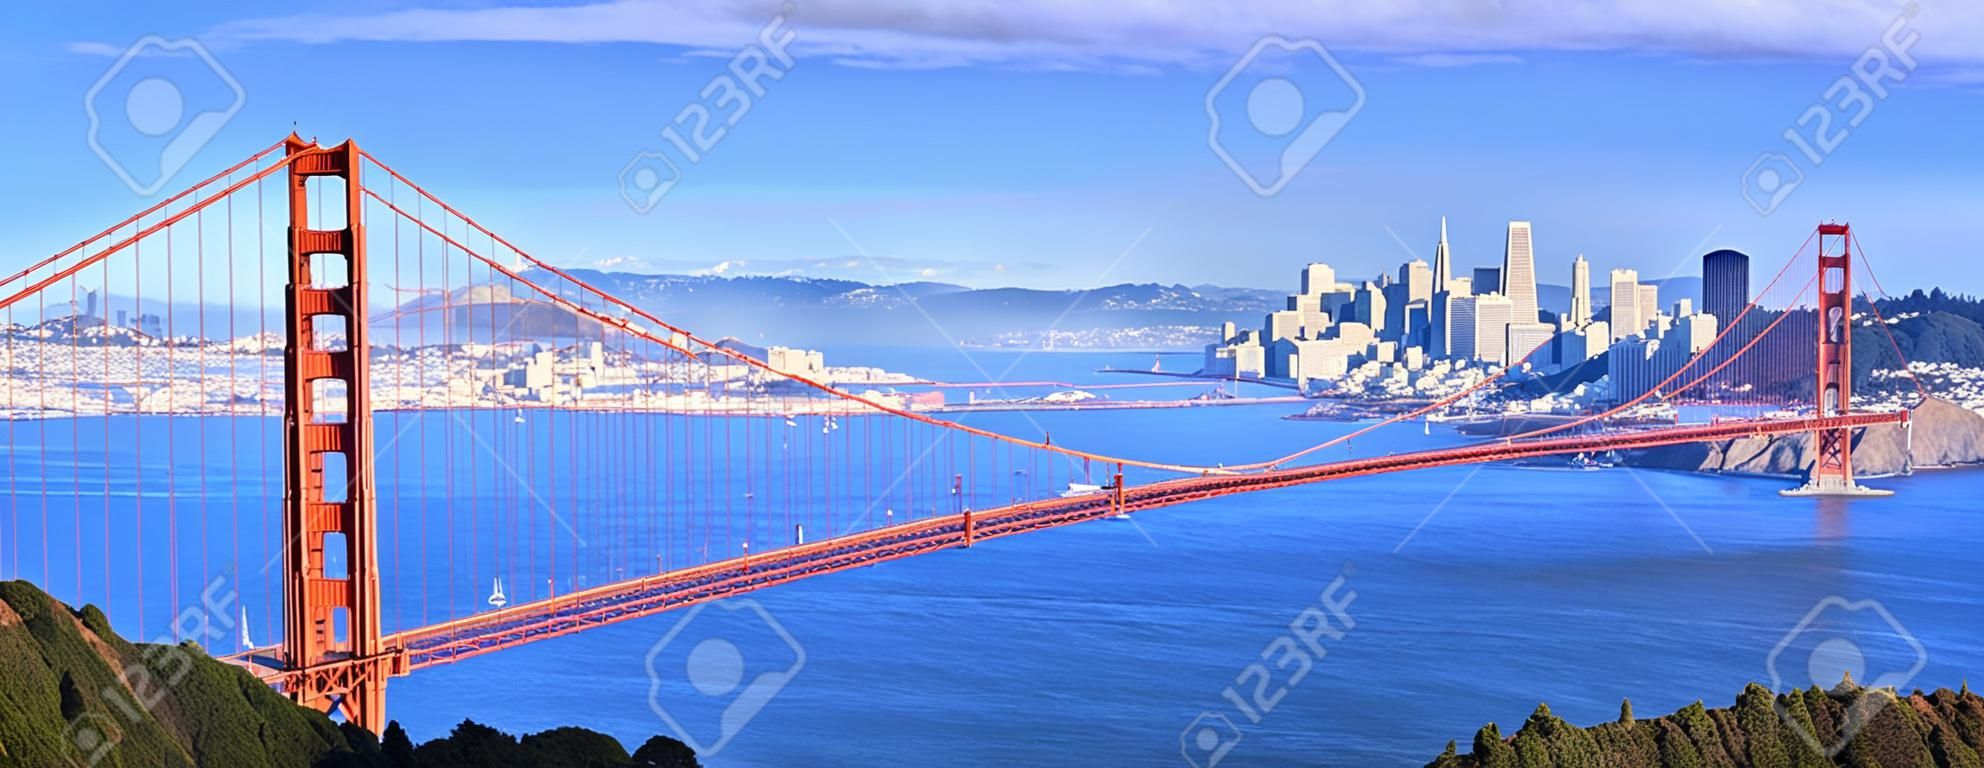 Panoramic view of famous Golden Gate Bridge and downtown San Francisco 